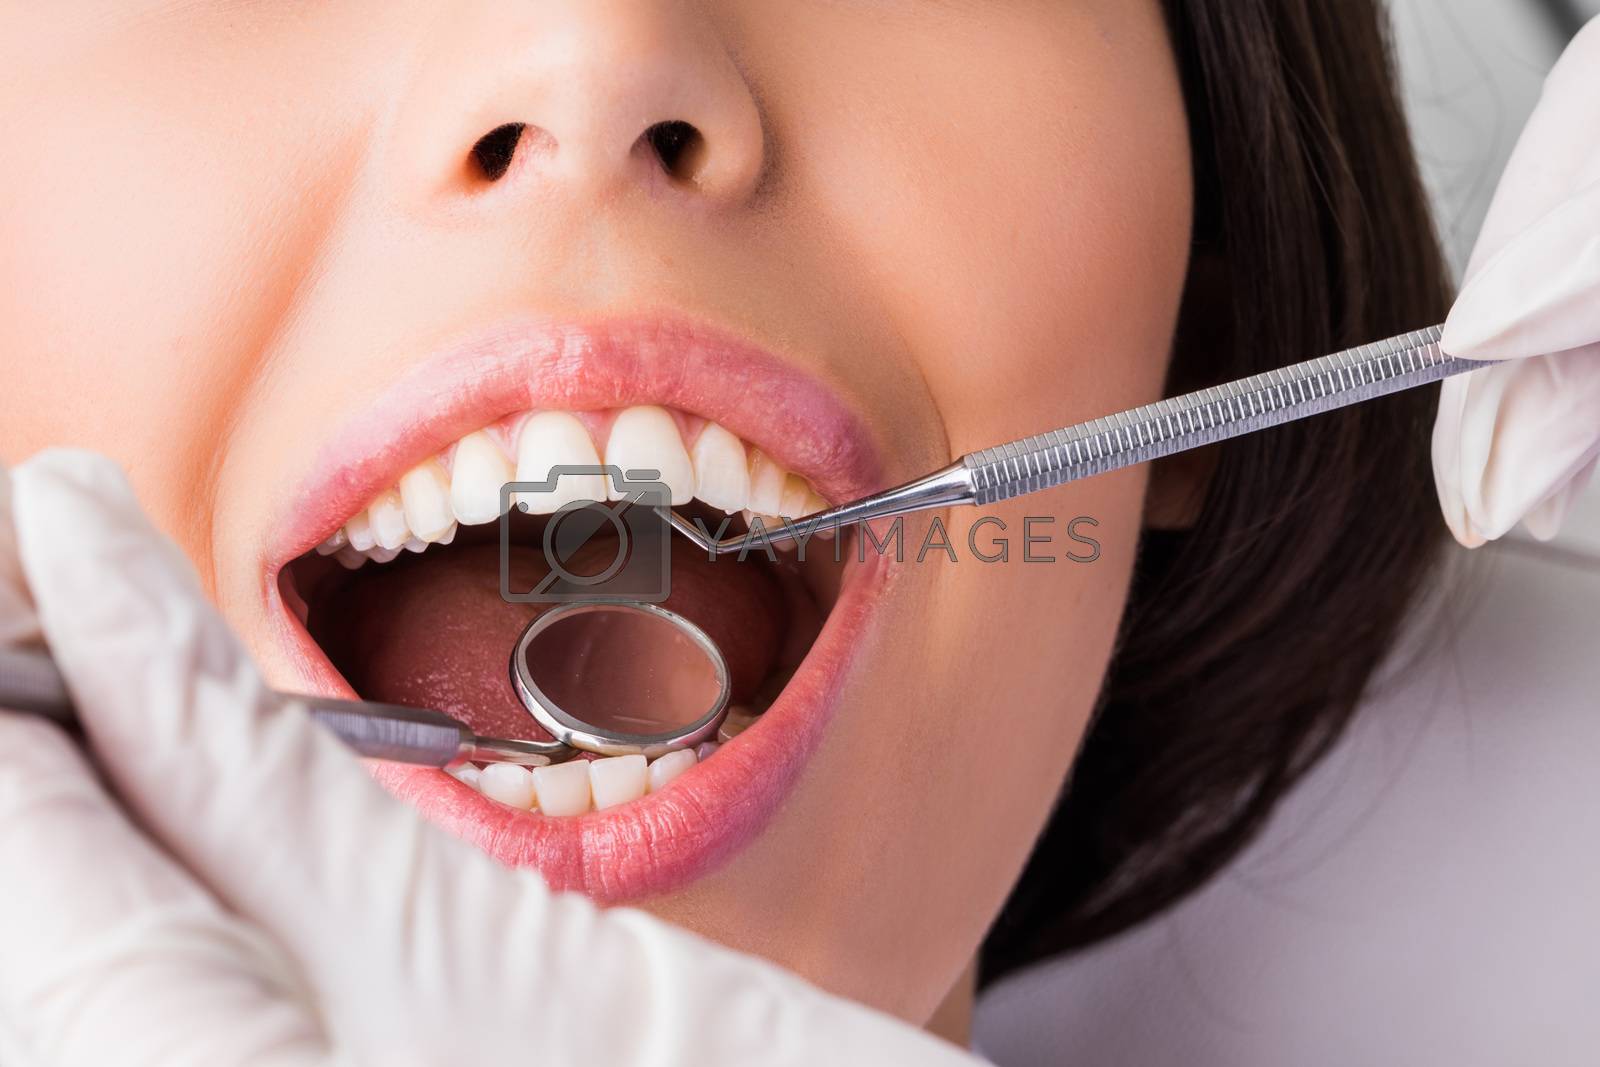 Close-up of open mouth during oral dental checkup at the dentist